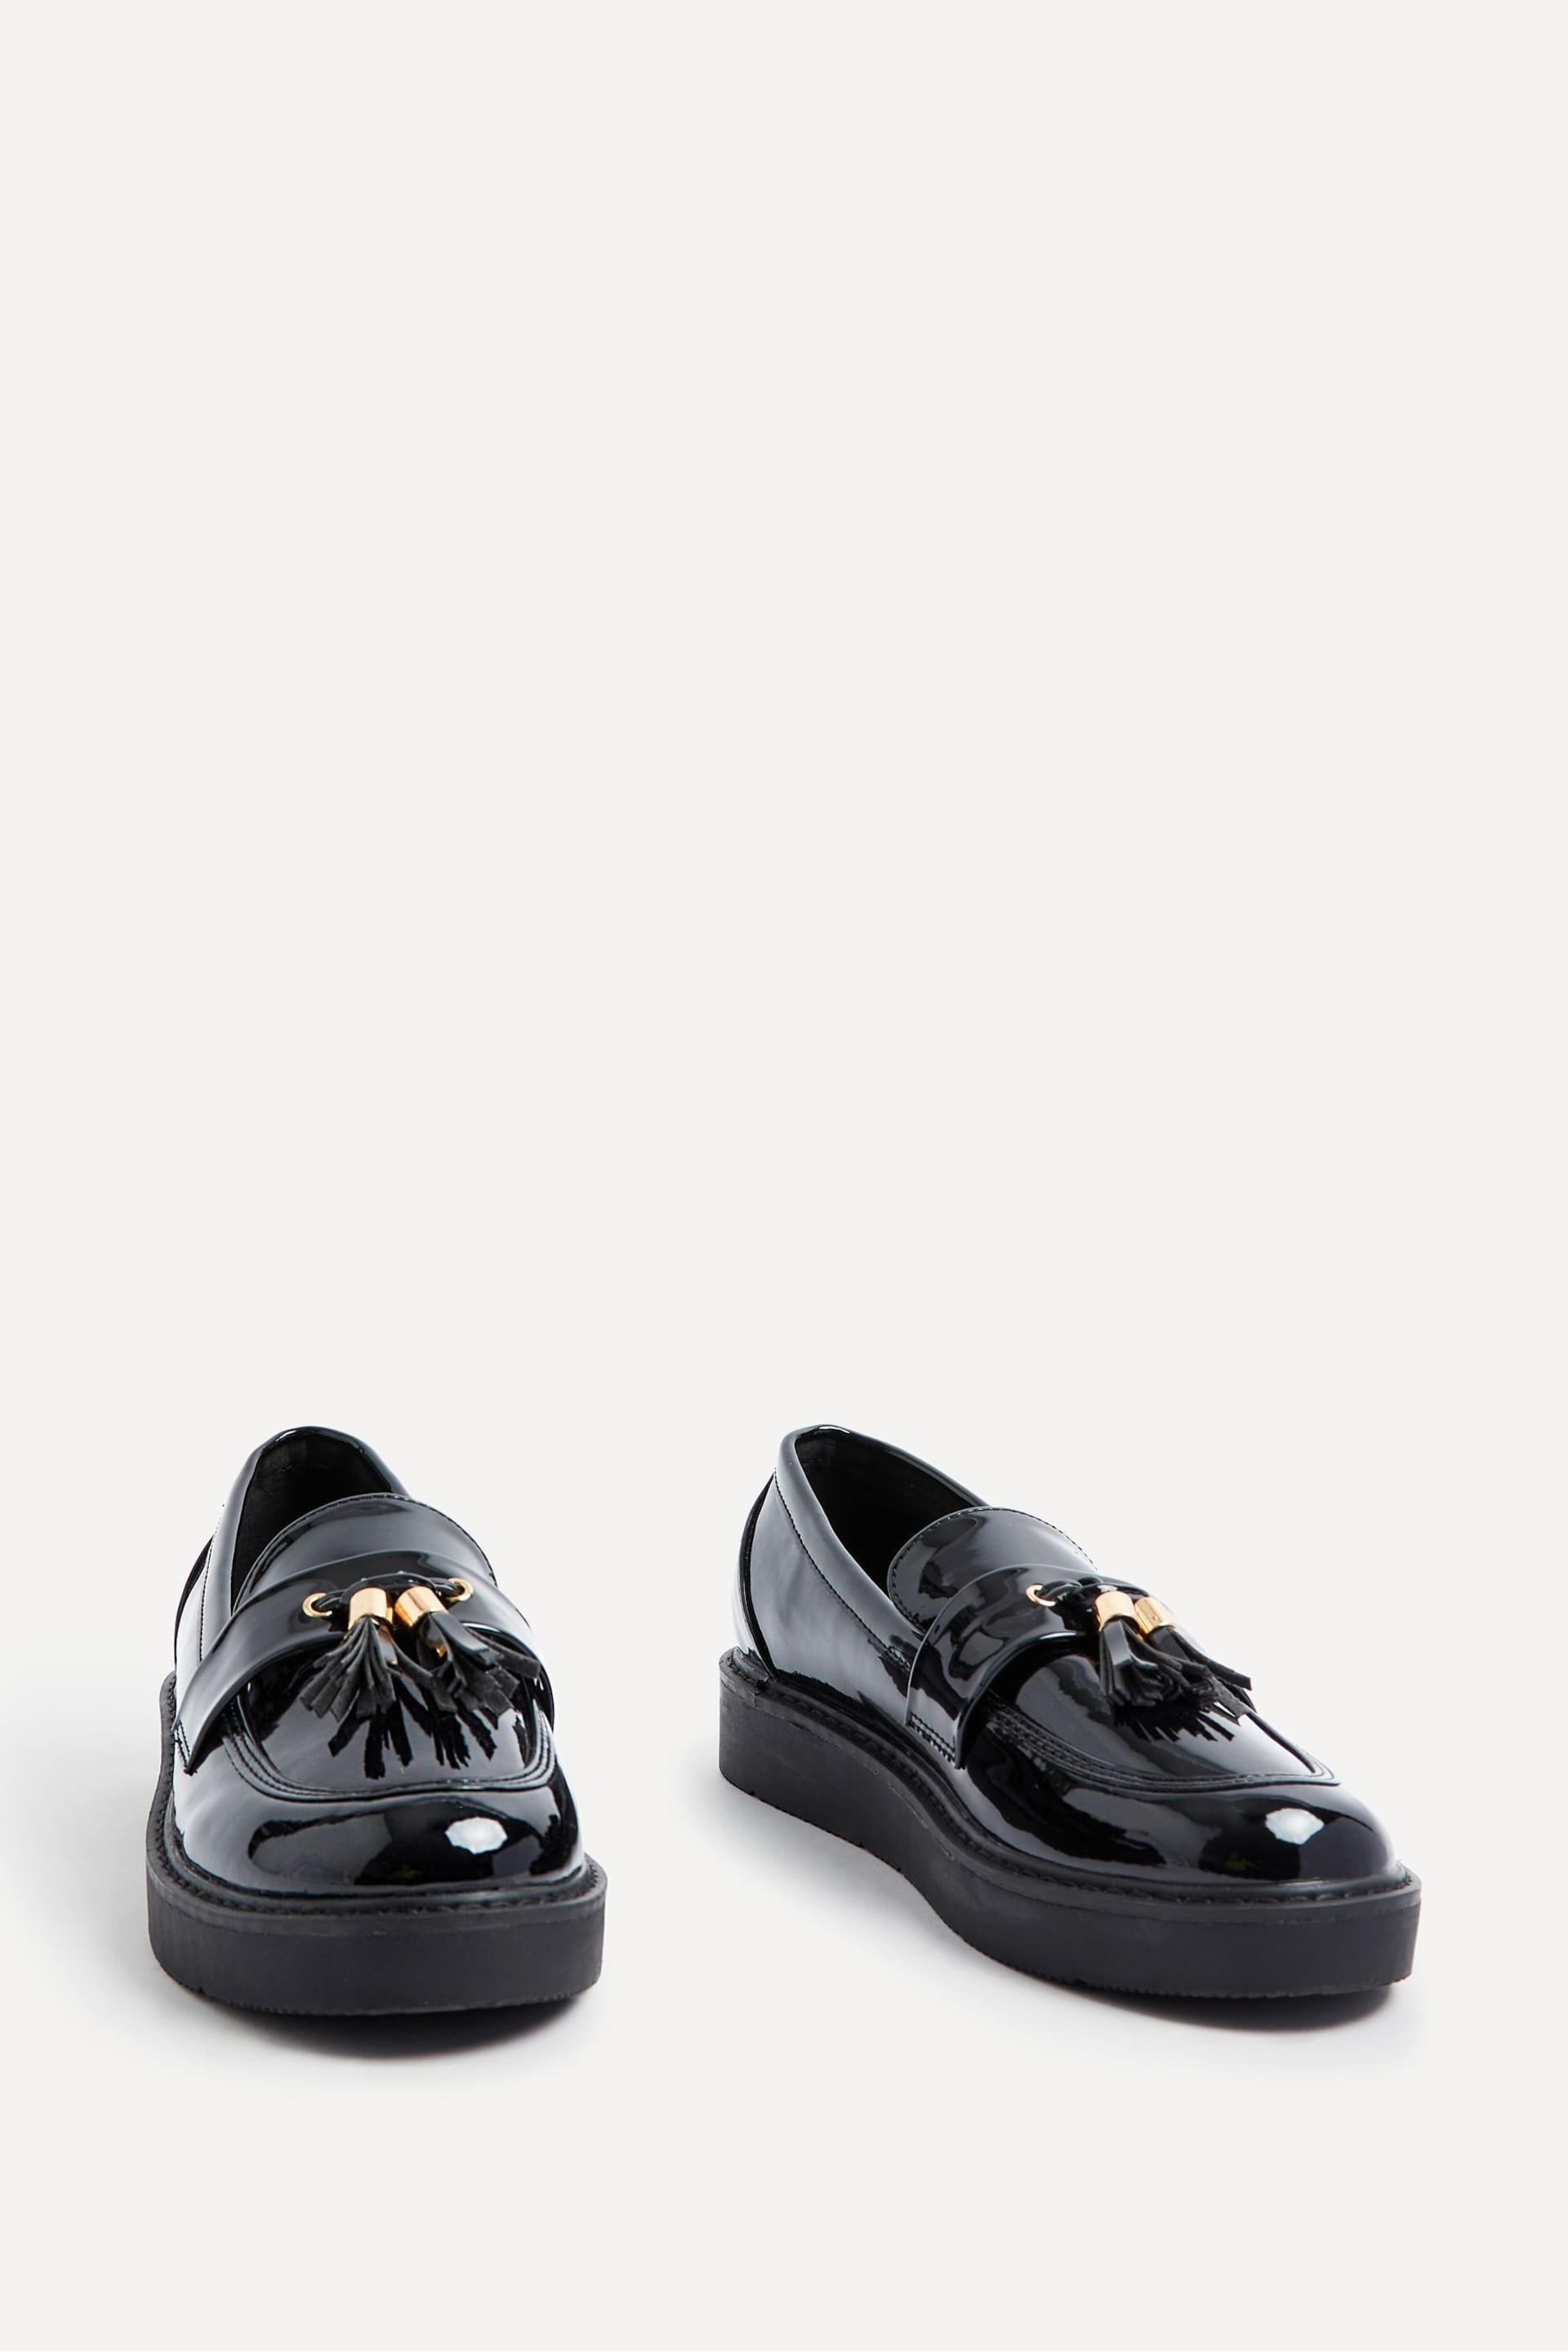 Linzi Black Gemina Platform Loafers with Tassels And Gold Detail - Image 3 of 5